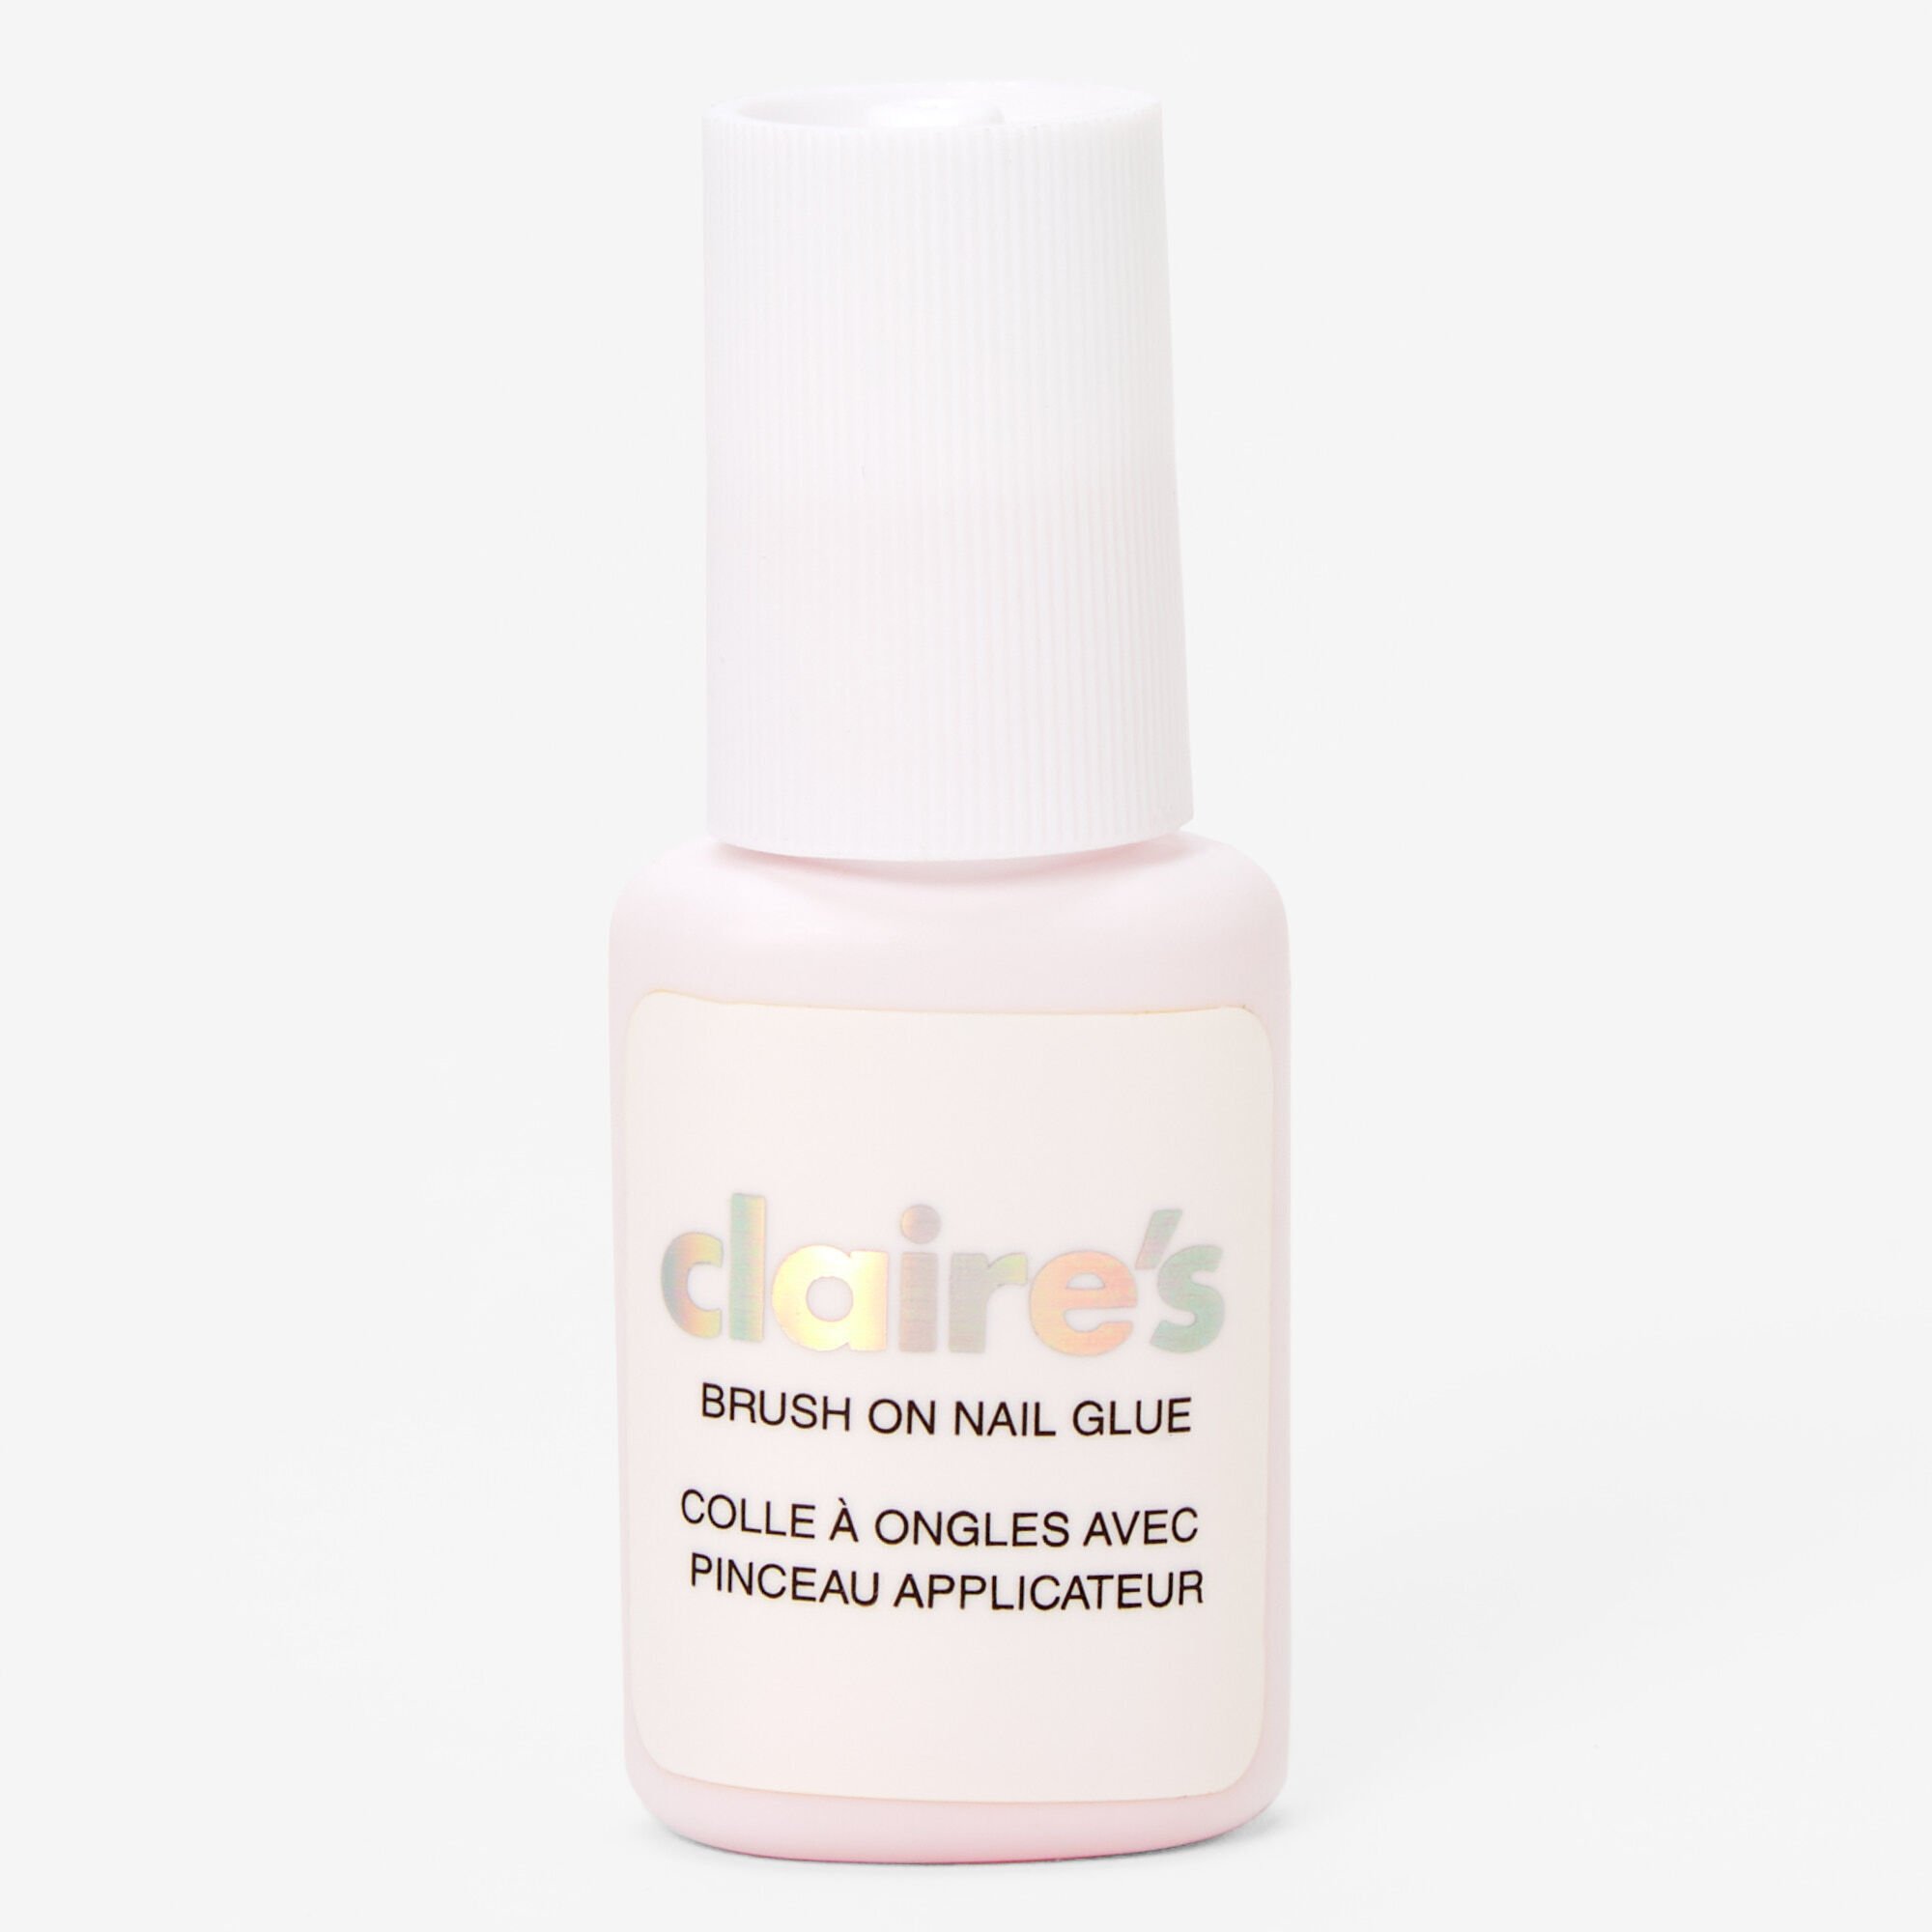 View Claires Brush On Faux Nail Glue information